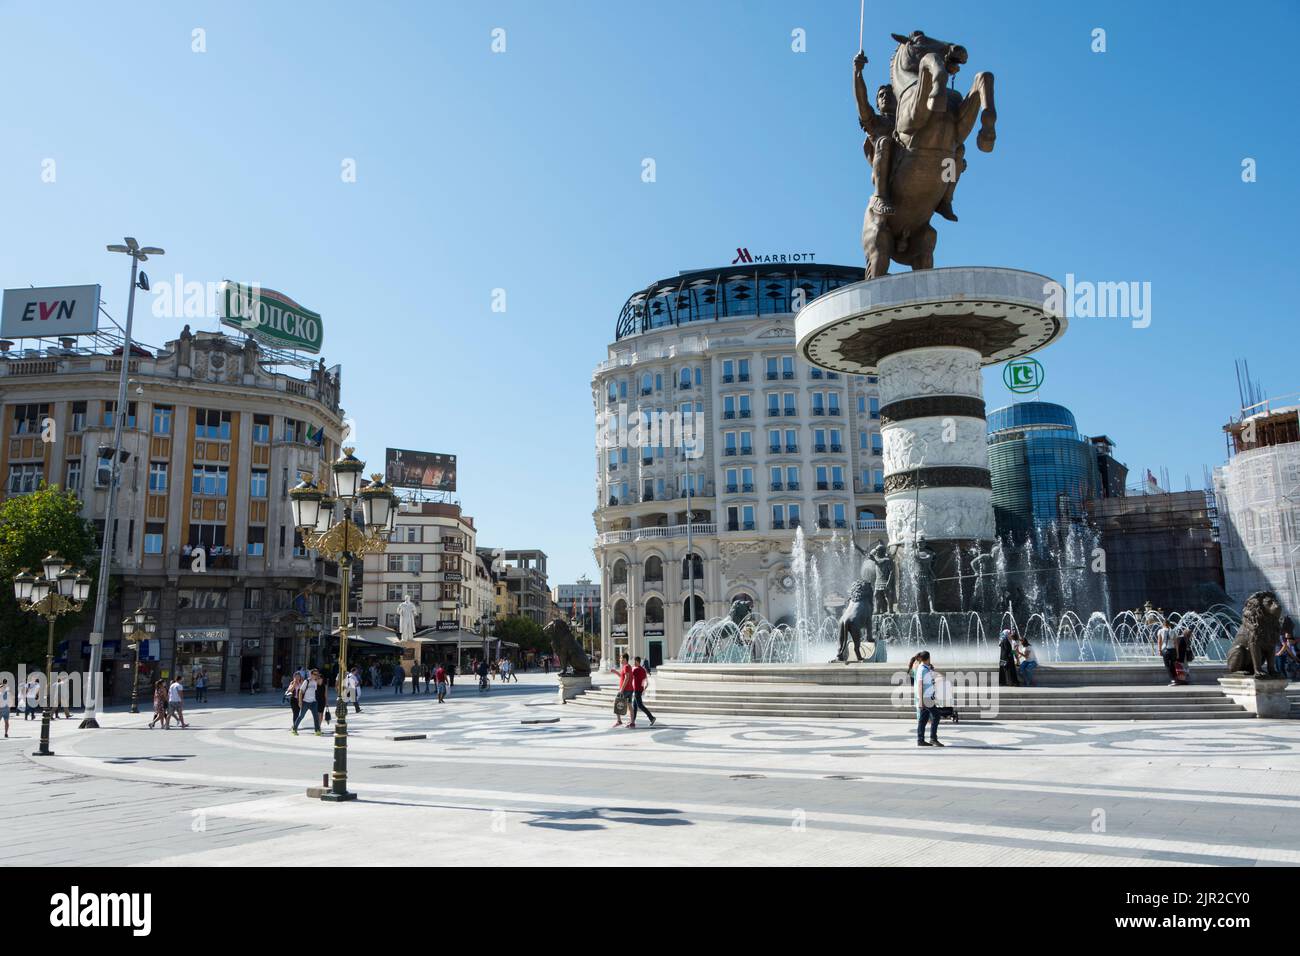 The with Greece disputed giant statue of Alexander the Great ( “Equestrian warrior”) at the “Macedonia” square in Skopje, capital of North Macedonia, Stock Photo